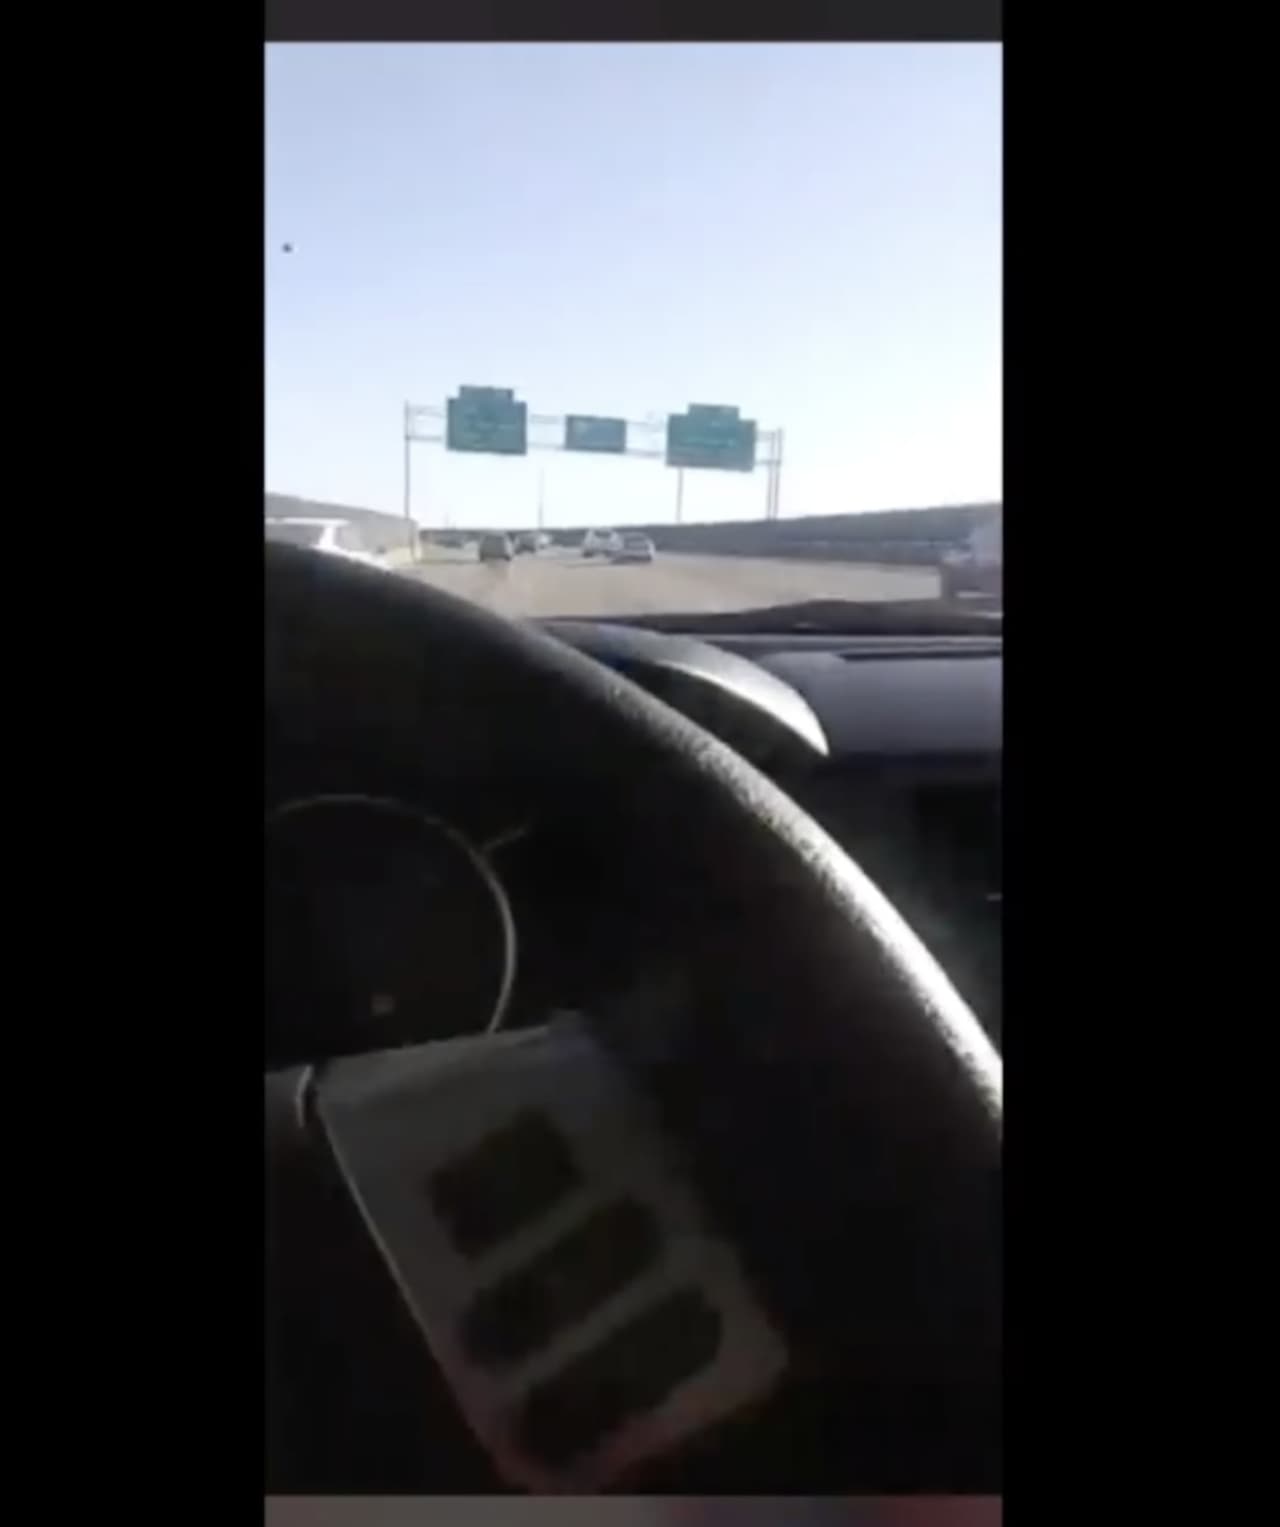 Man live streams himself going over 100 mph on I-95 before he crashes.